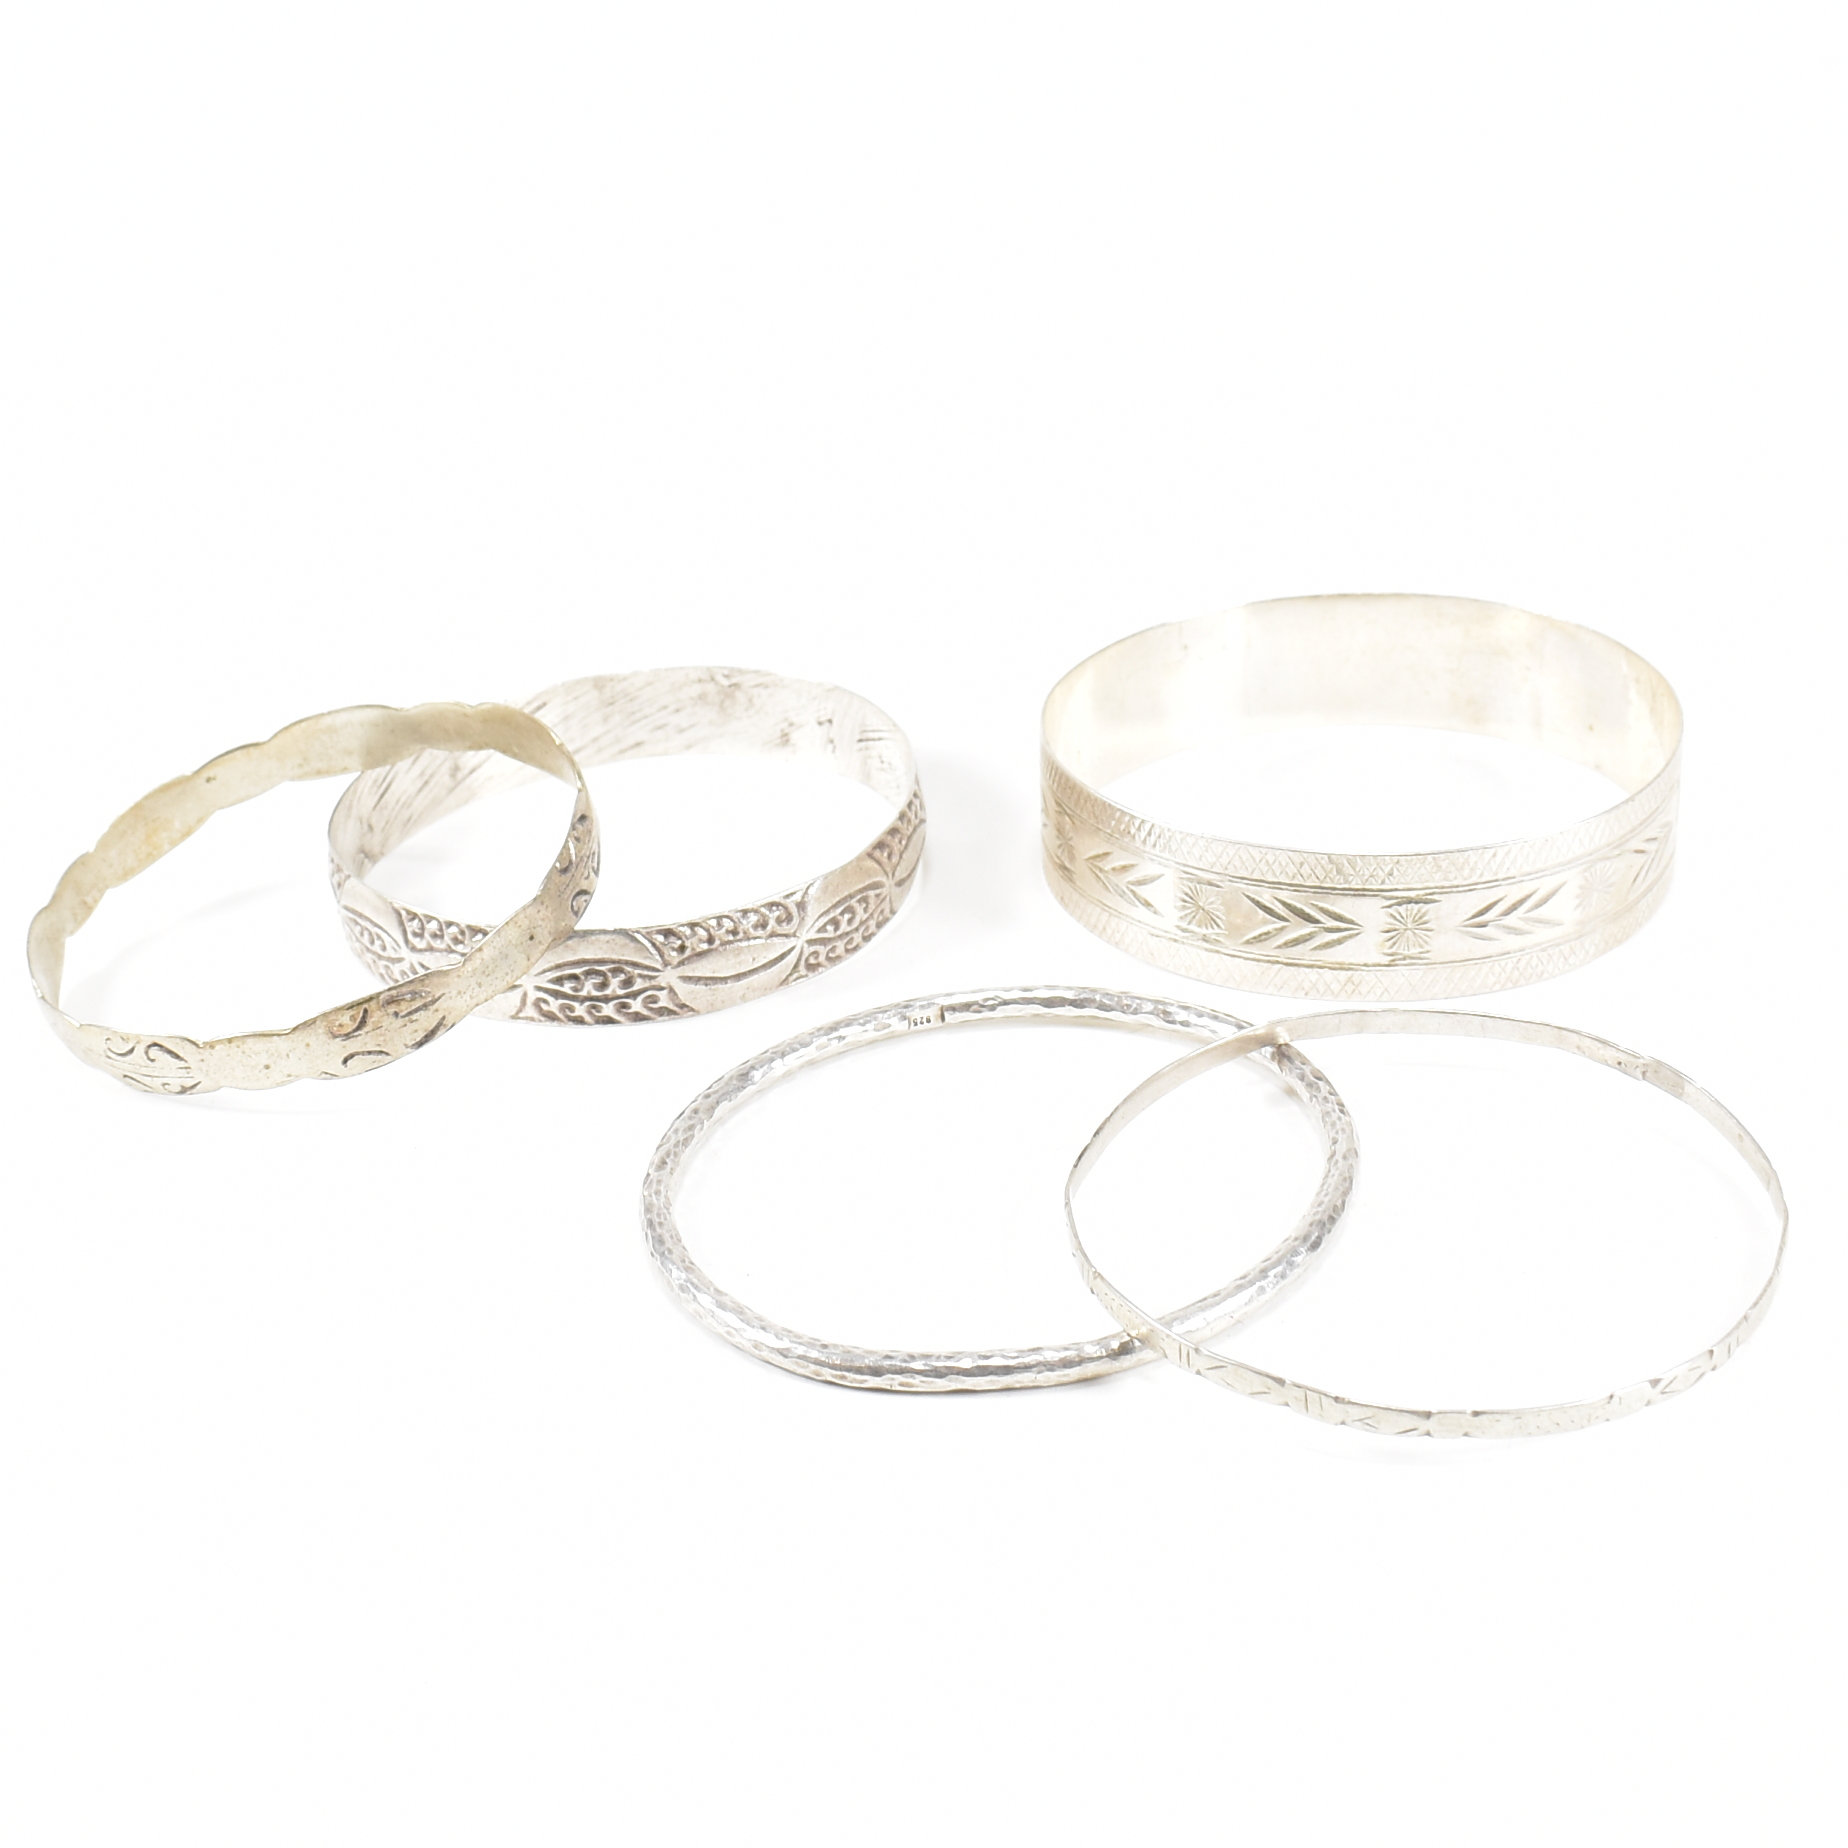 COLLECTION OF 5 925 SILVER & WHITE METAL BANGLES - Image 4 of 8